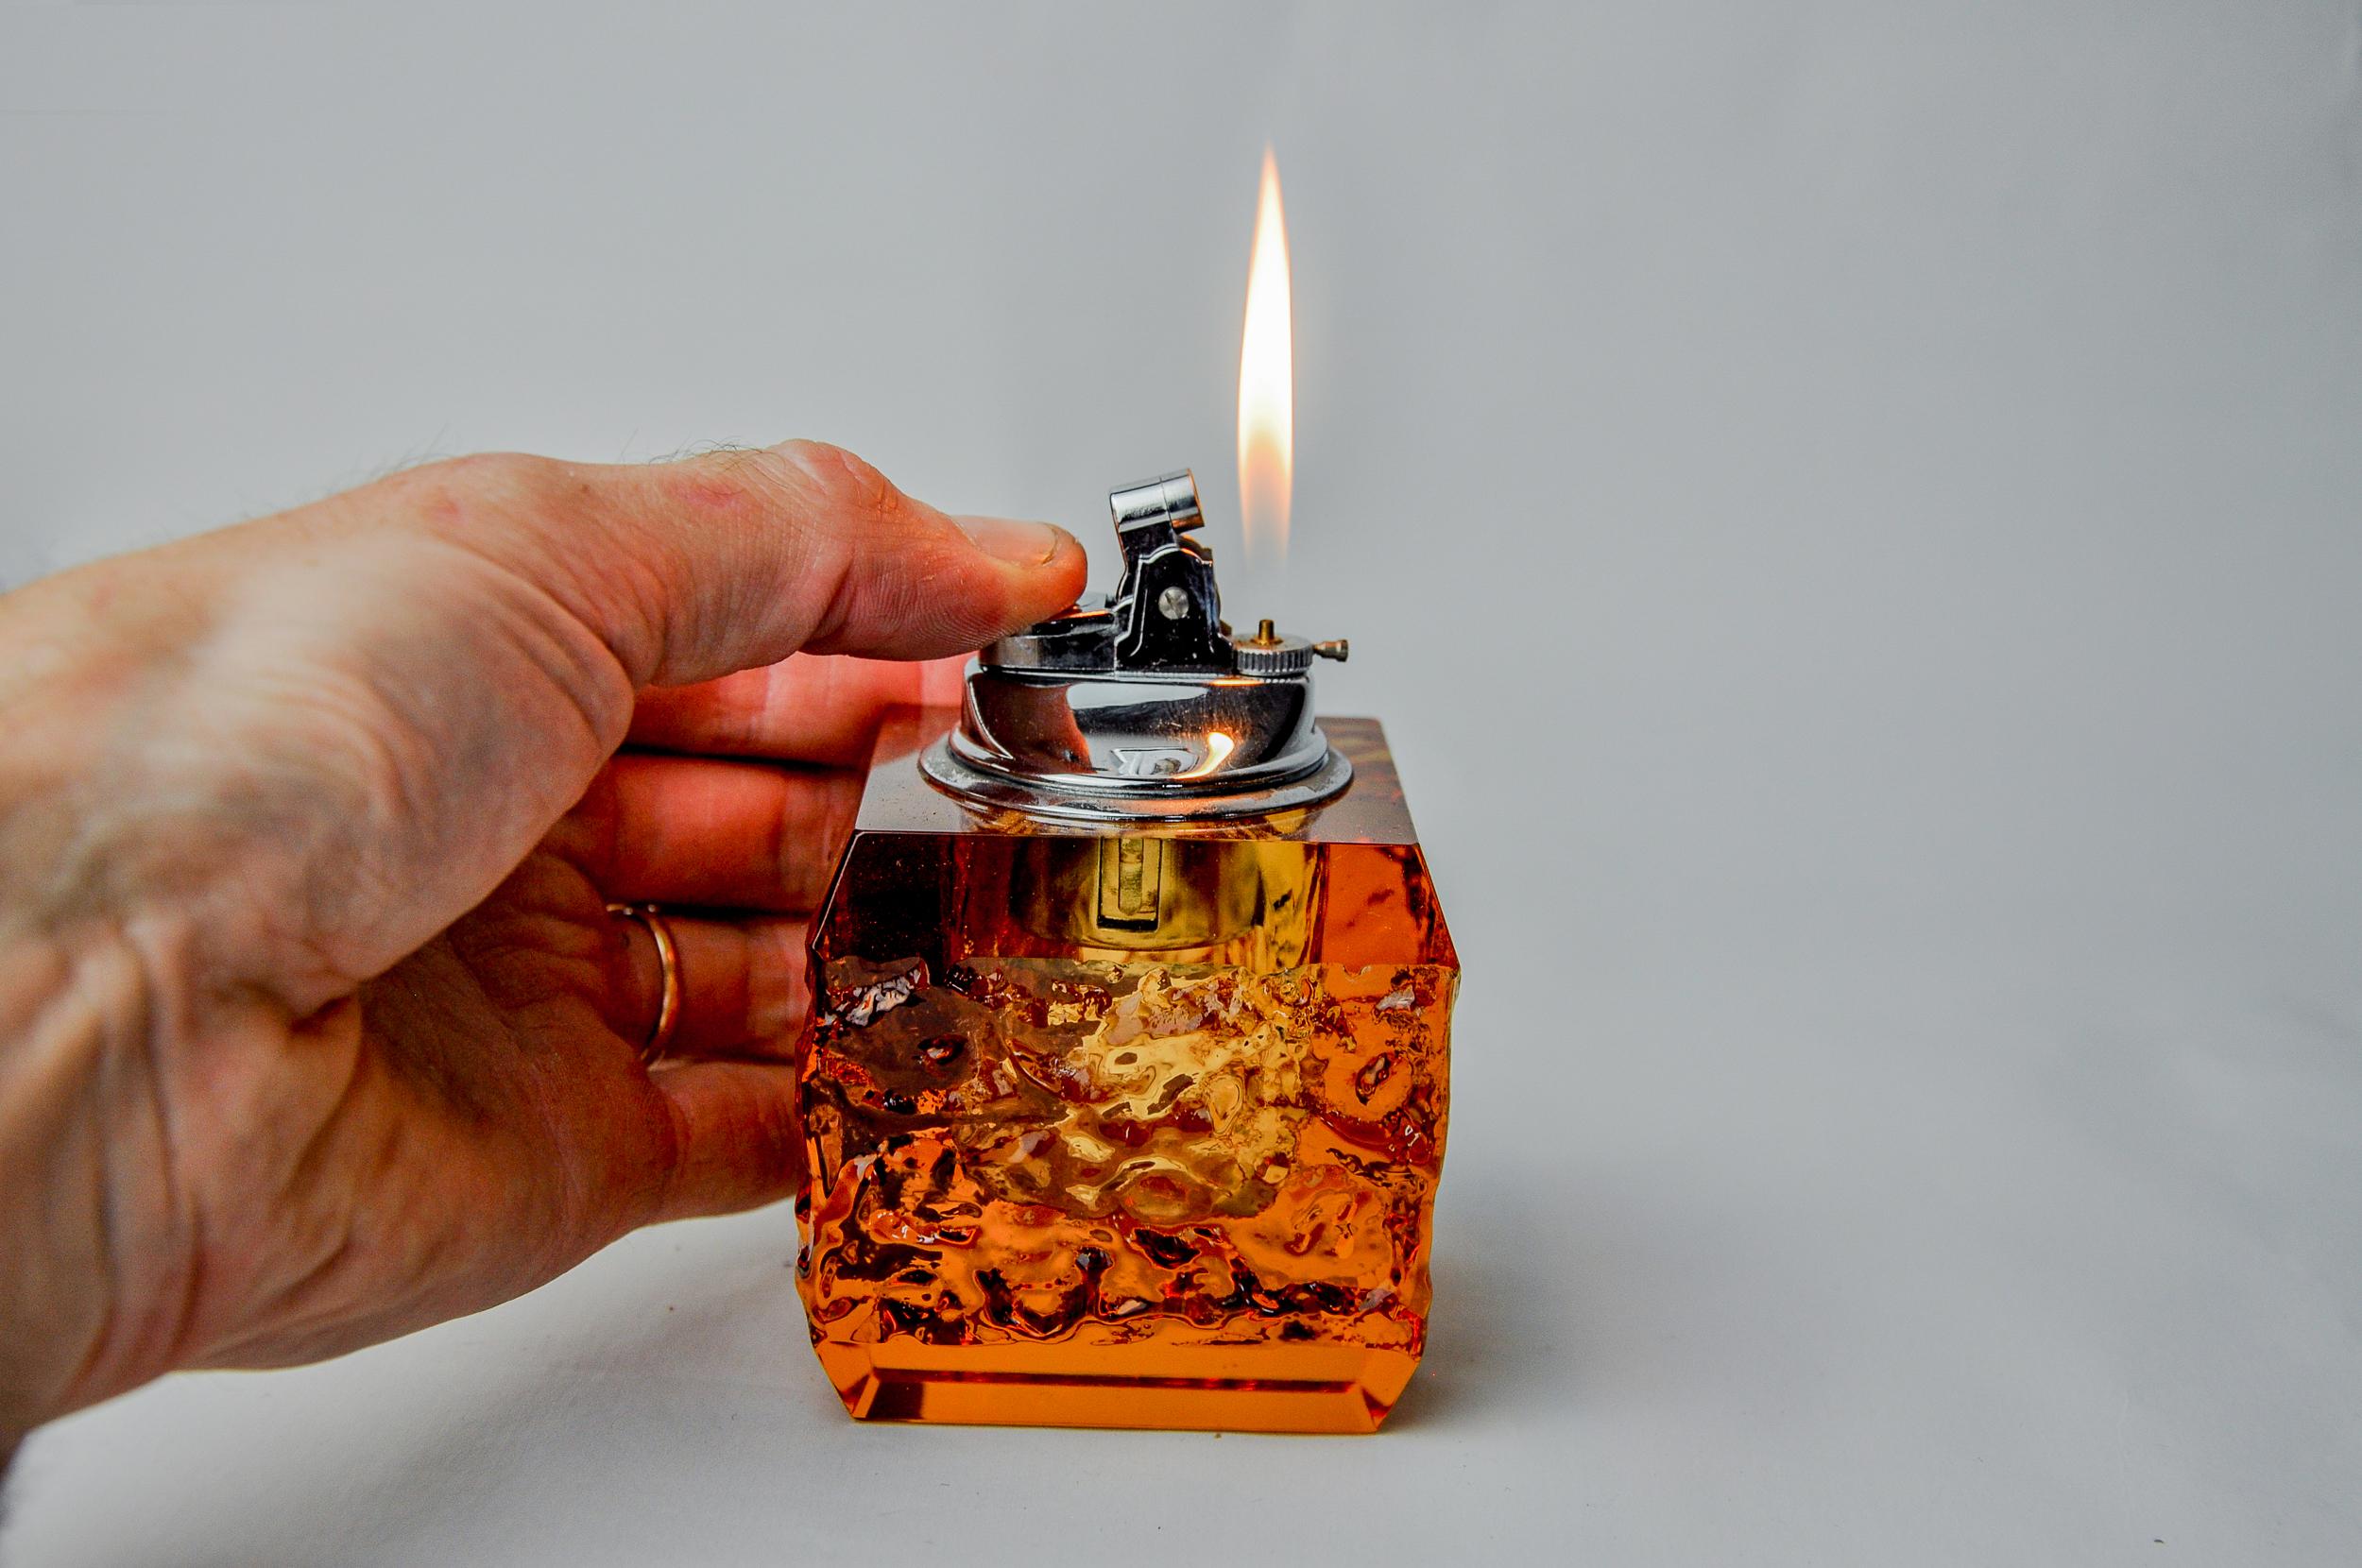 Superb and rare ice lighter designed and produced by antonio imperatore in italy in the 1970s. Orange frosted effect murano glass lighter handcrafted by venetian master glassmakers. Decorative object that will bring a real design touch to your